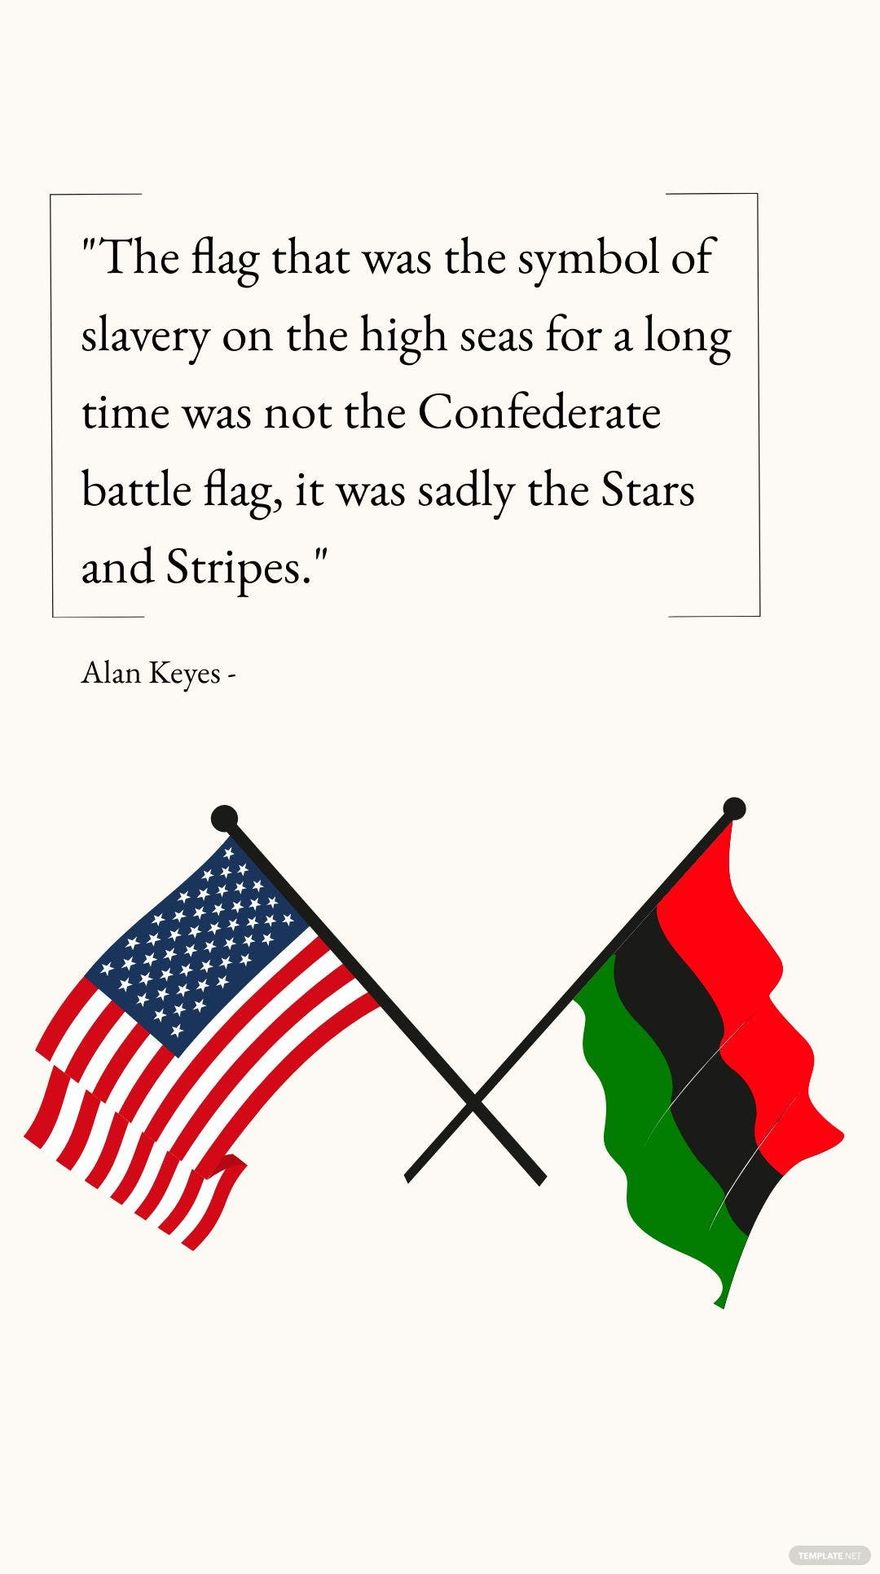 Alan Keyes - The flag that was the symbol of slavery on the high seas for a long time was not the Confederate battle flag, it was sadly the Stars and Stripes.